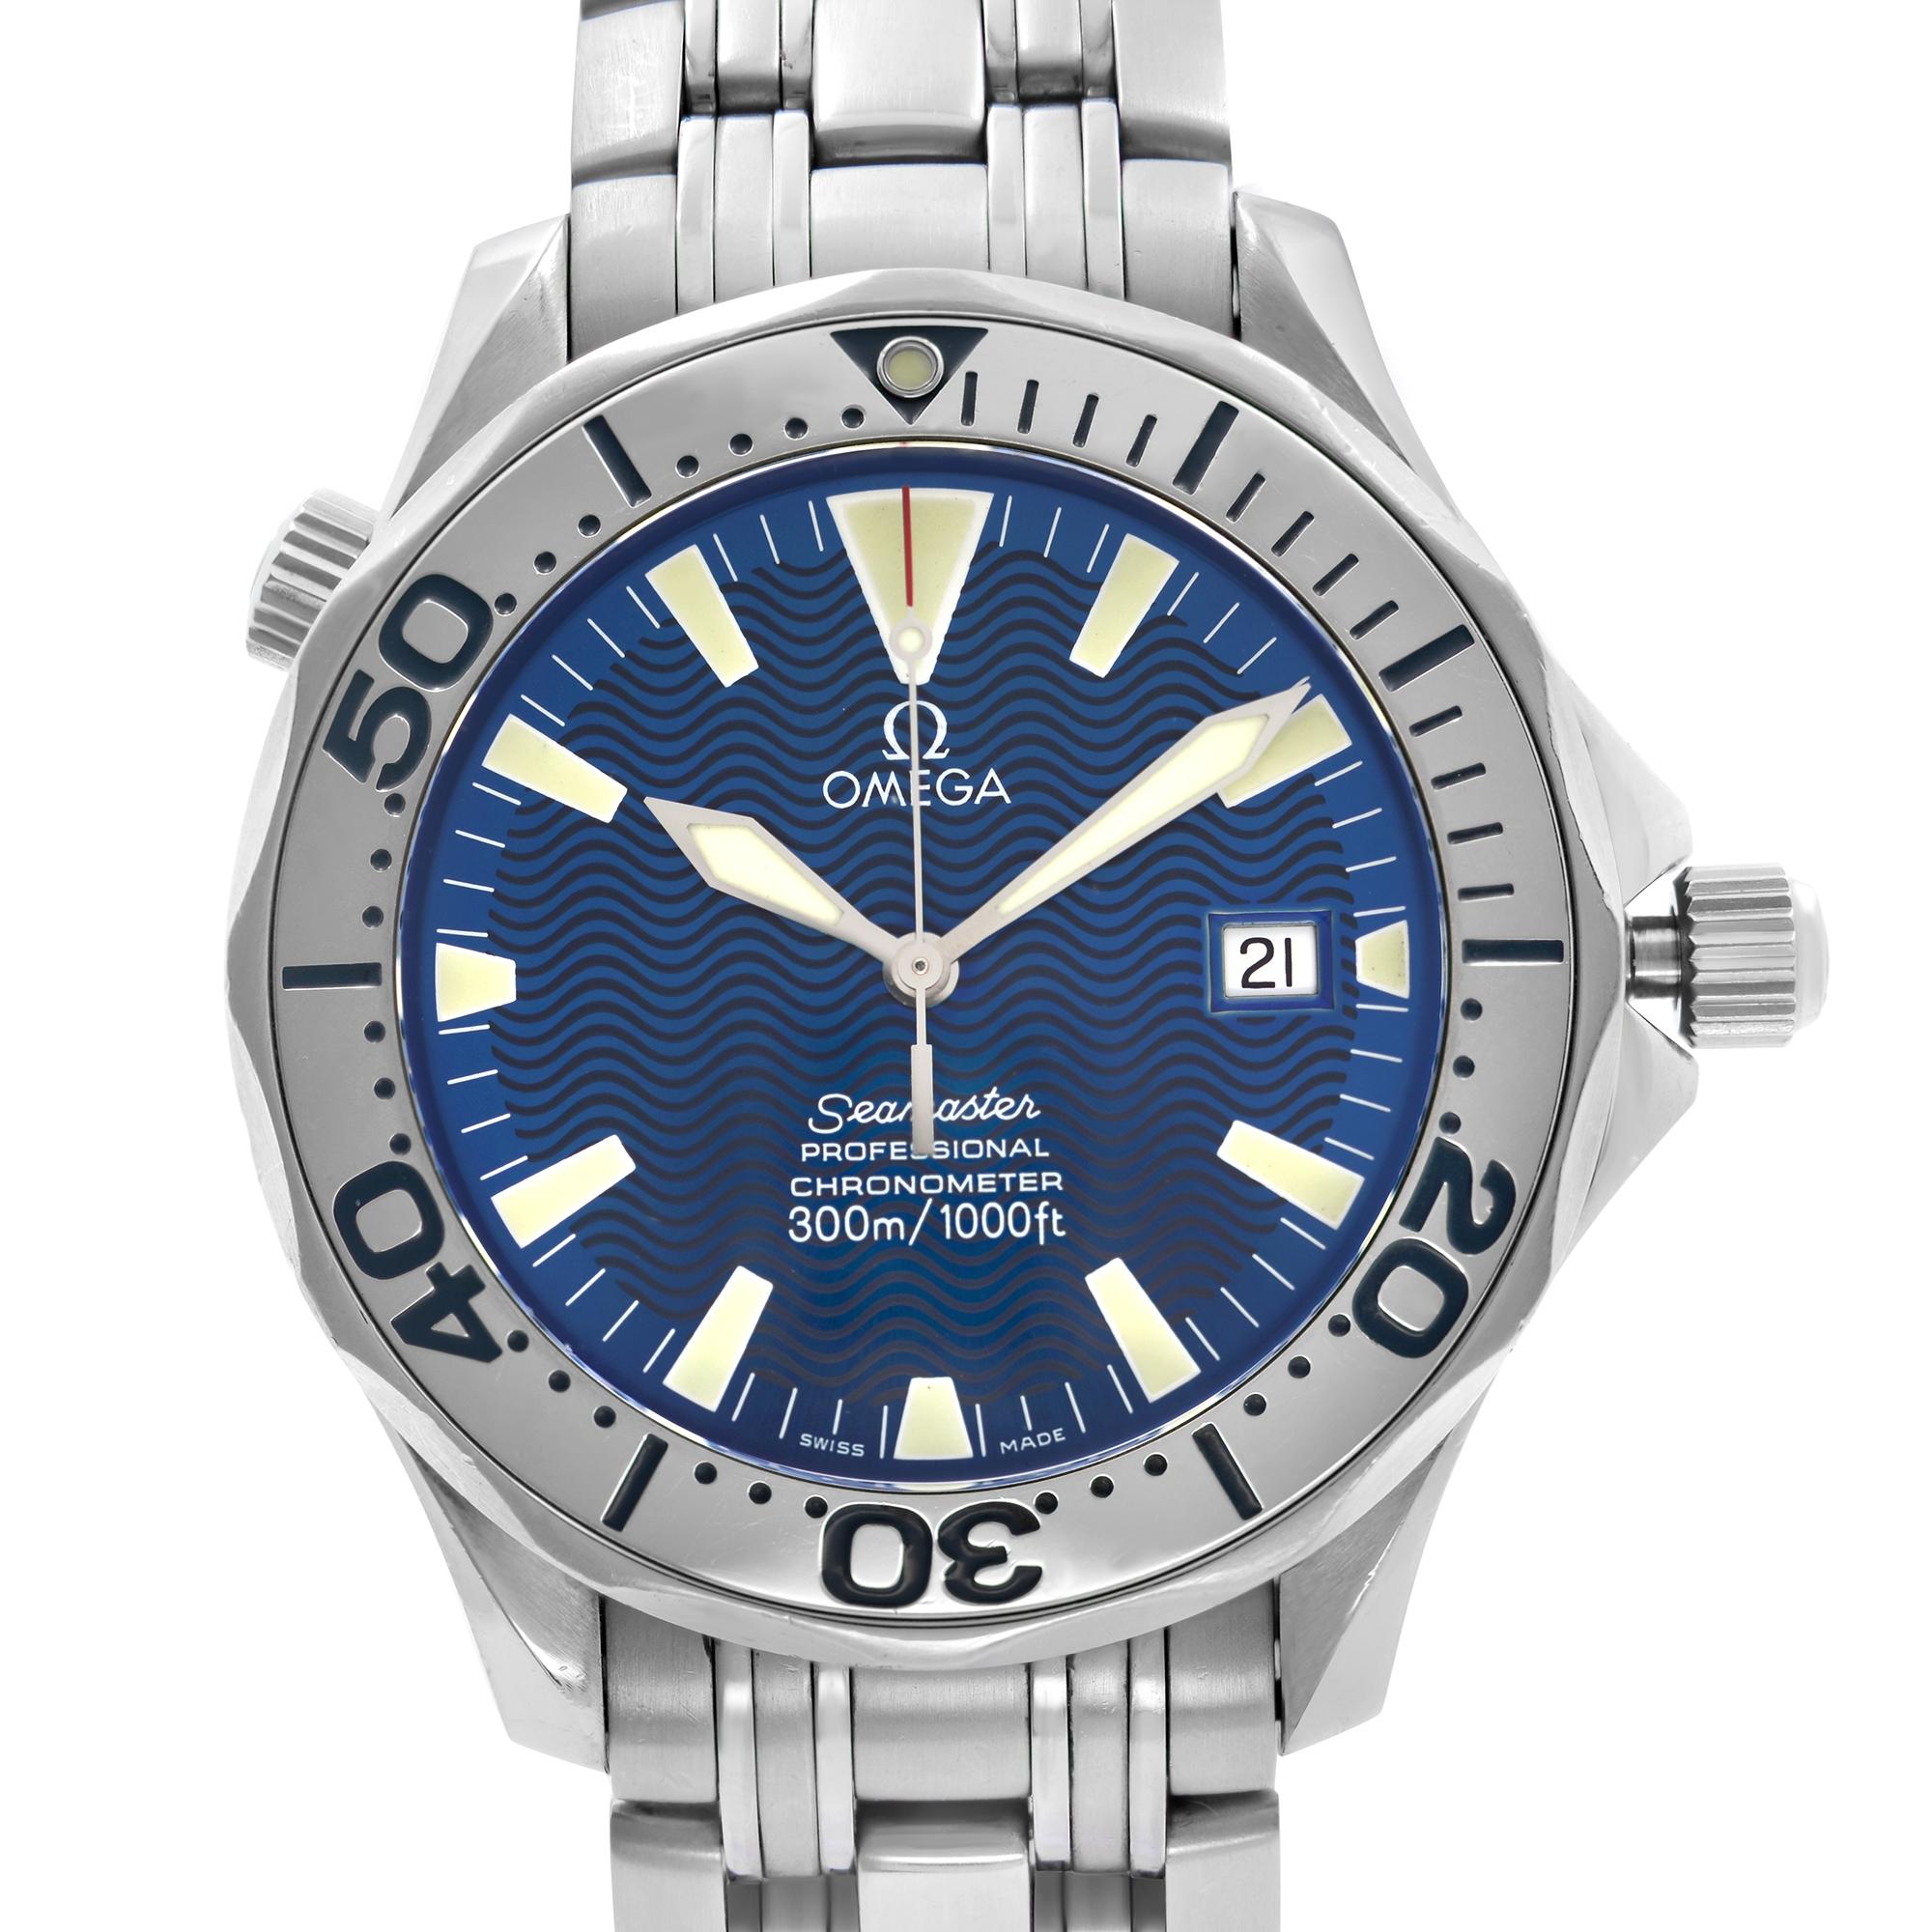 Pre-owned Omega Seamaster Stainless Steel Blue Dial Automatic Men's Watch. Minor dents on the bezel insert and on the edges.  No Original Box and Papers are Included. Comes with Chronostore Presentation Box and Authenticity Card. Covered by 1-year